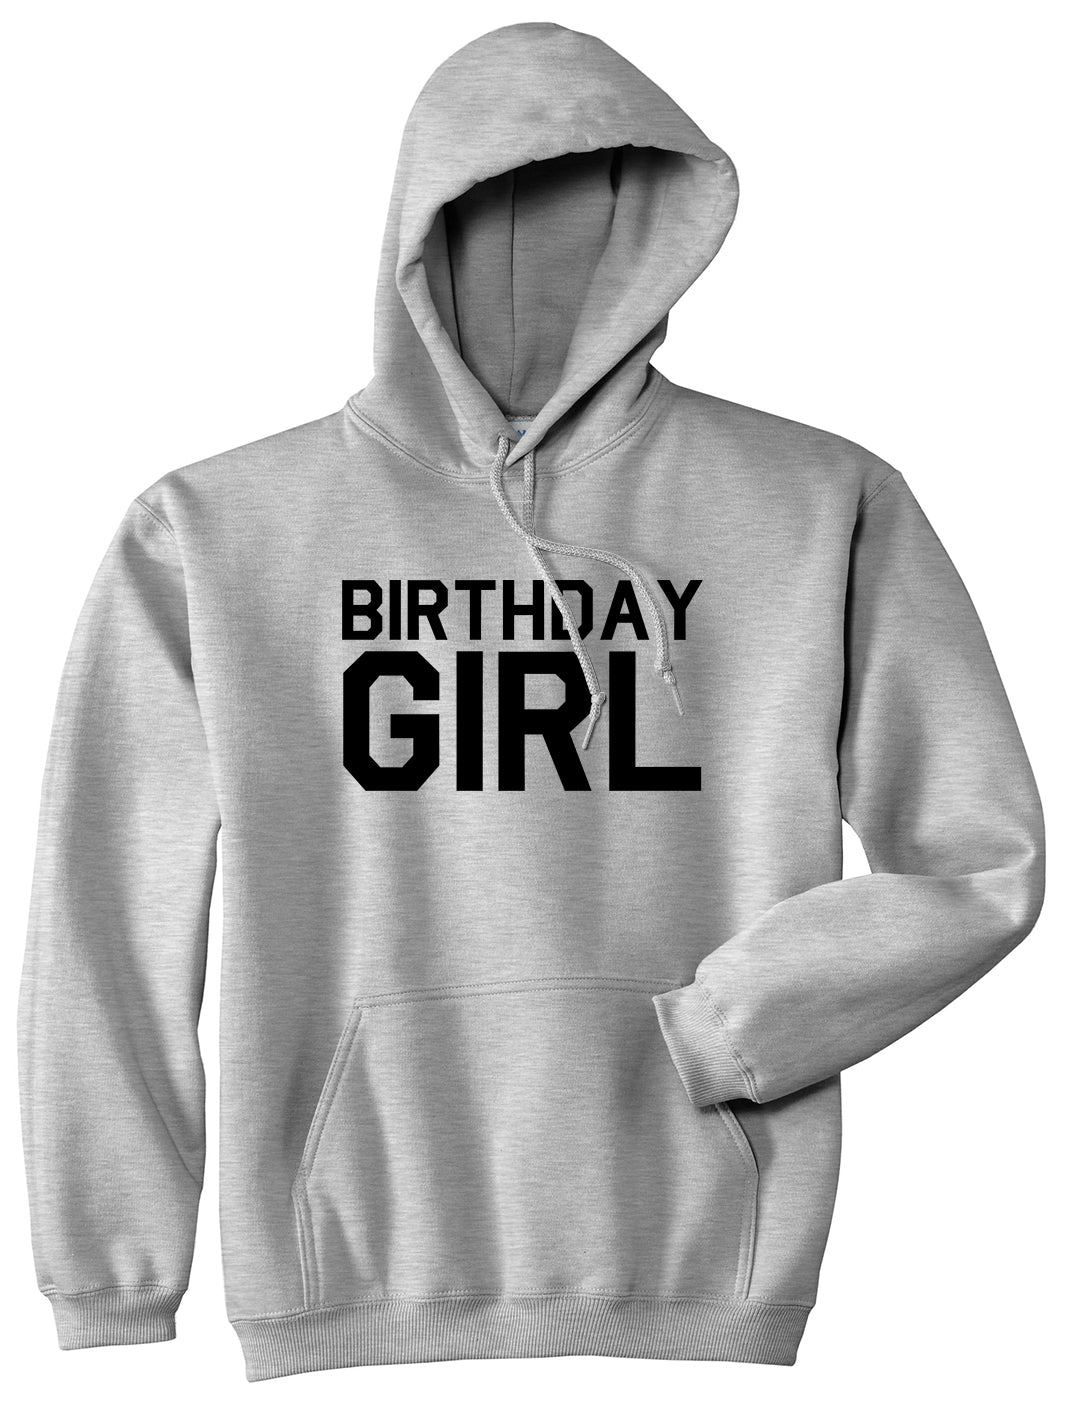 Birthday Girl Grey Pullover Hoodie by Kings Of NY